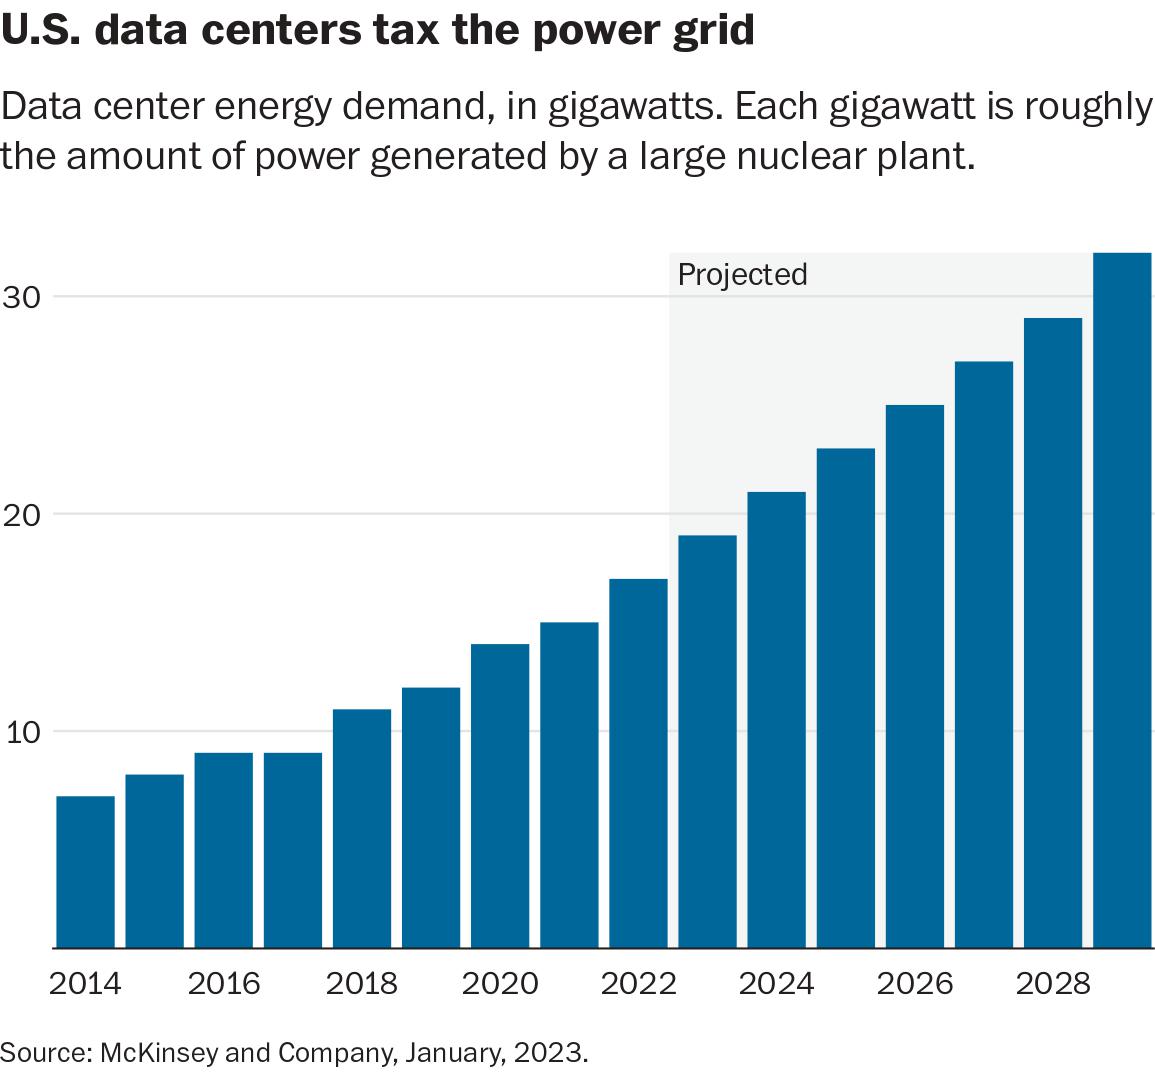 Data center energy demand, in gigawatts. Each gigawatt is roughly the amount of power generated by a large nuclear plant.